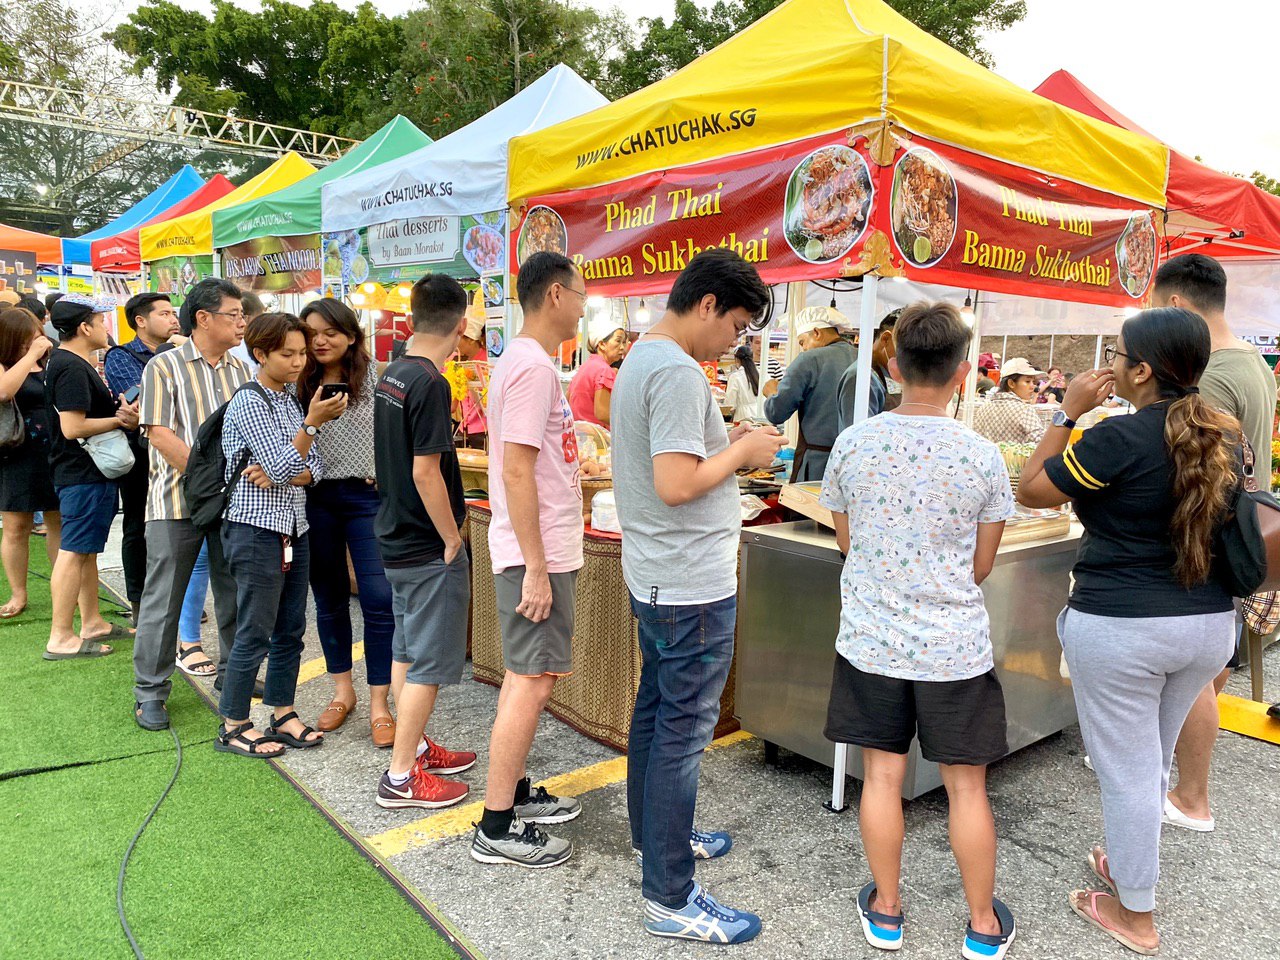 People queuing for Pad Thai at Chatuchak market in Singapore